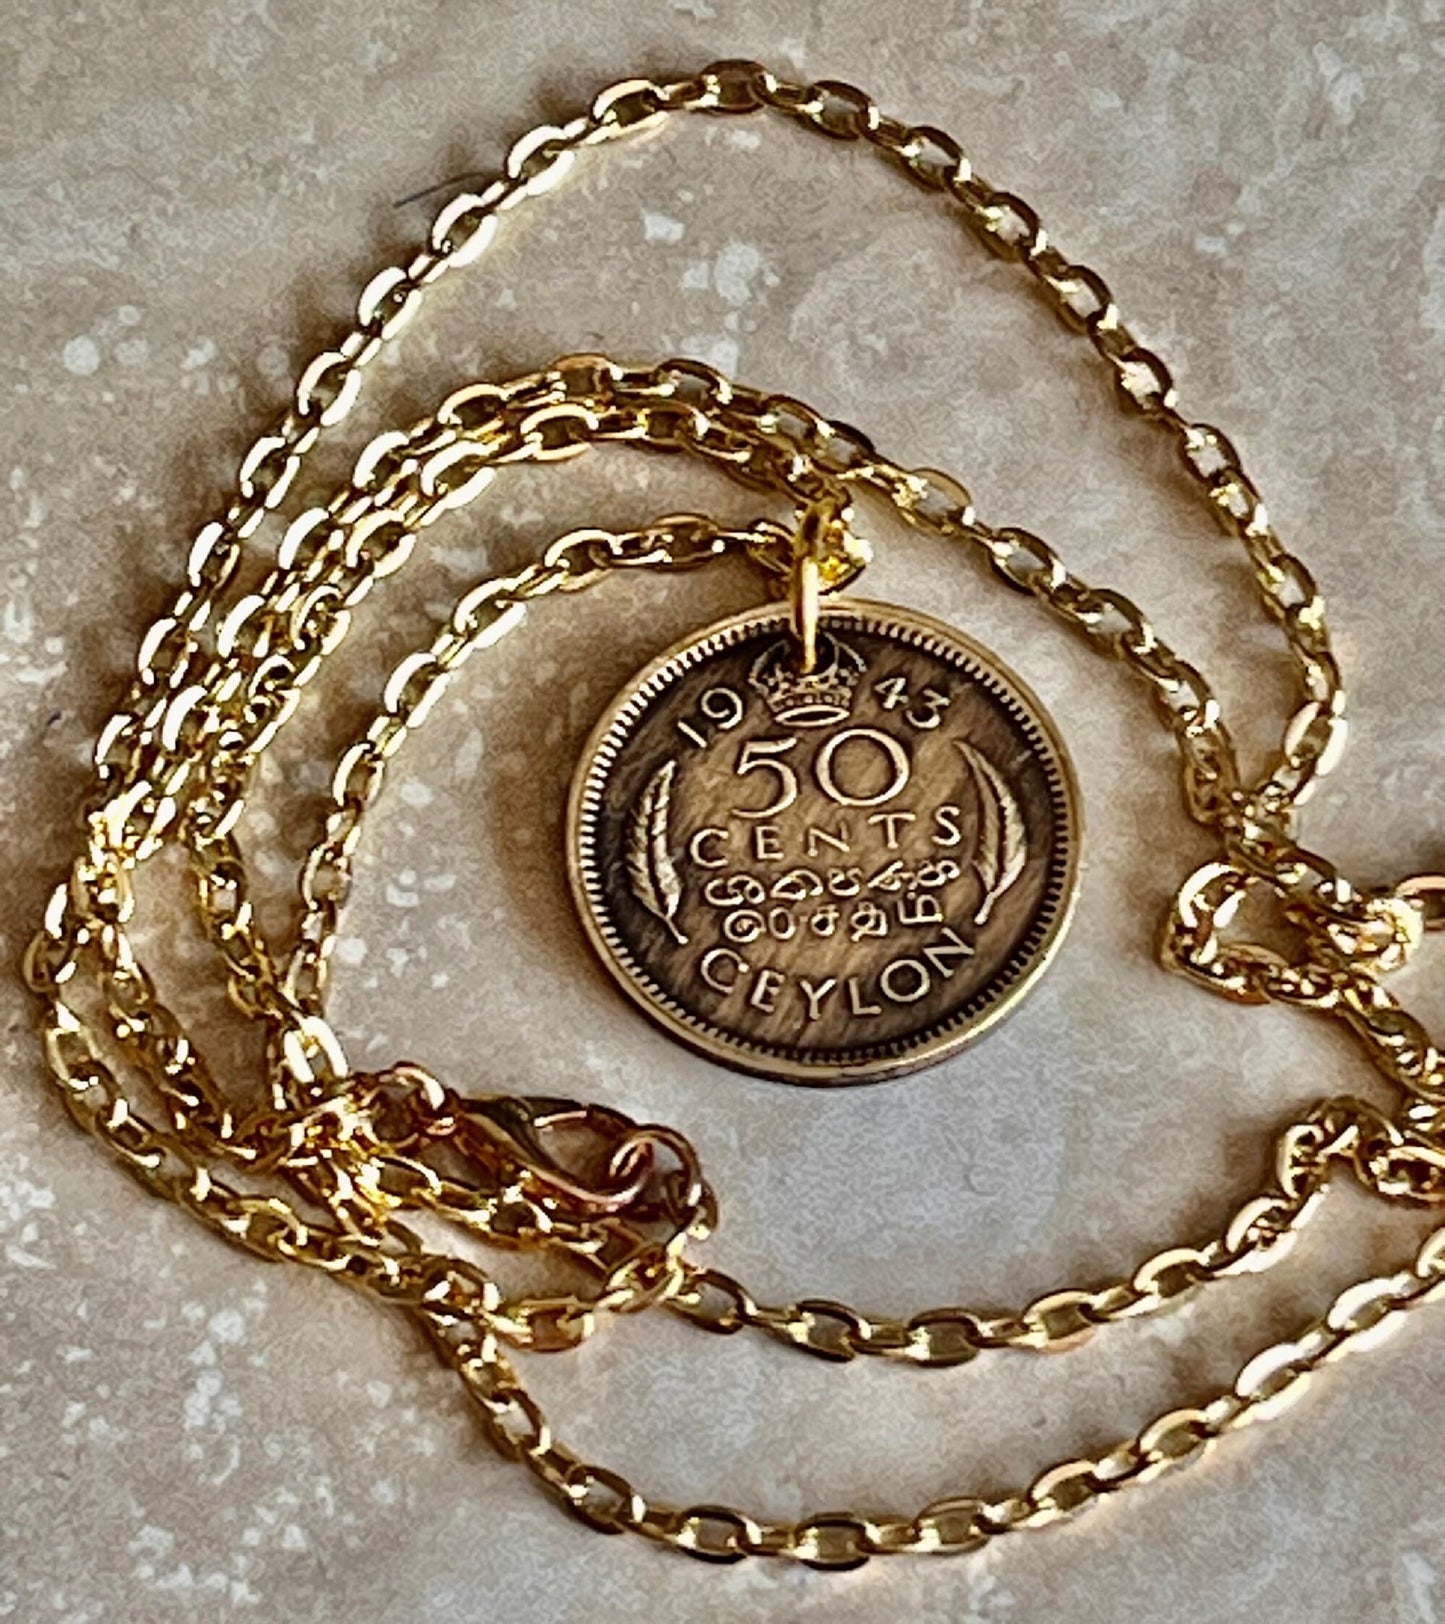 Ceylon Coin Necklace 50 Cents Pendant Handmade Custom Made Charm Gift For Friend Coin Charm Gift For Him, Coin Collector, World Coins